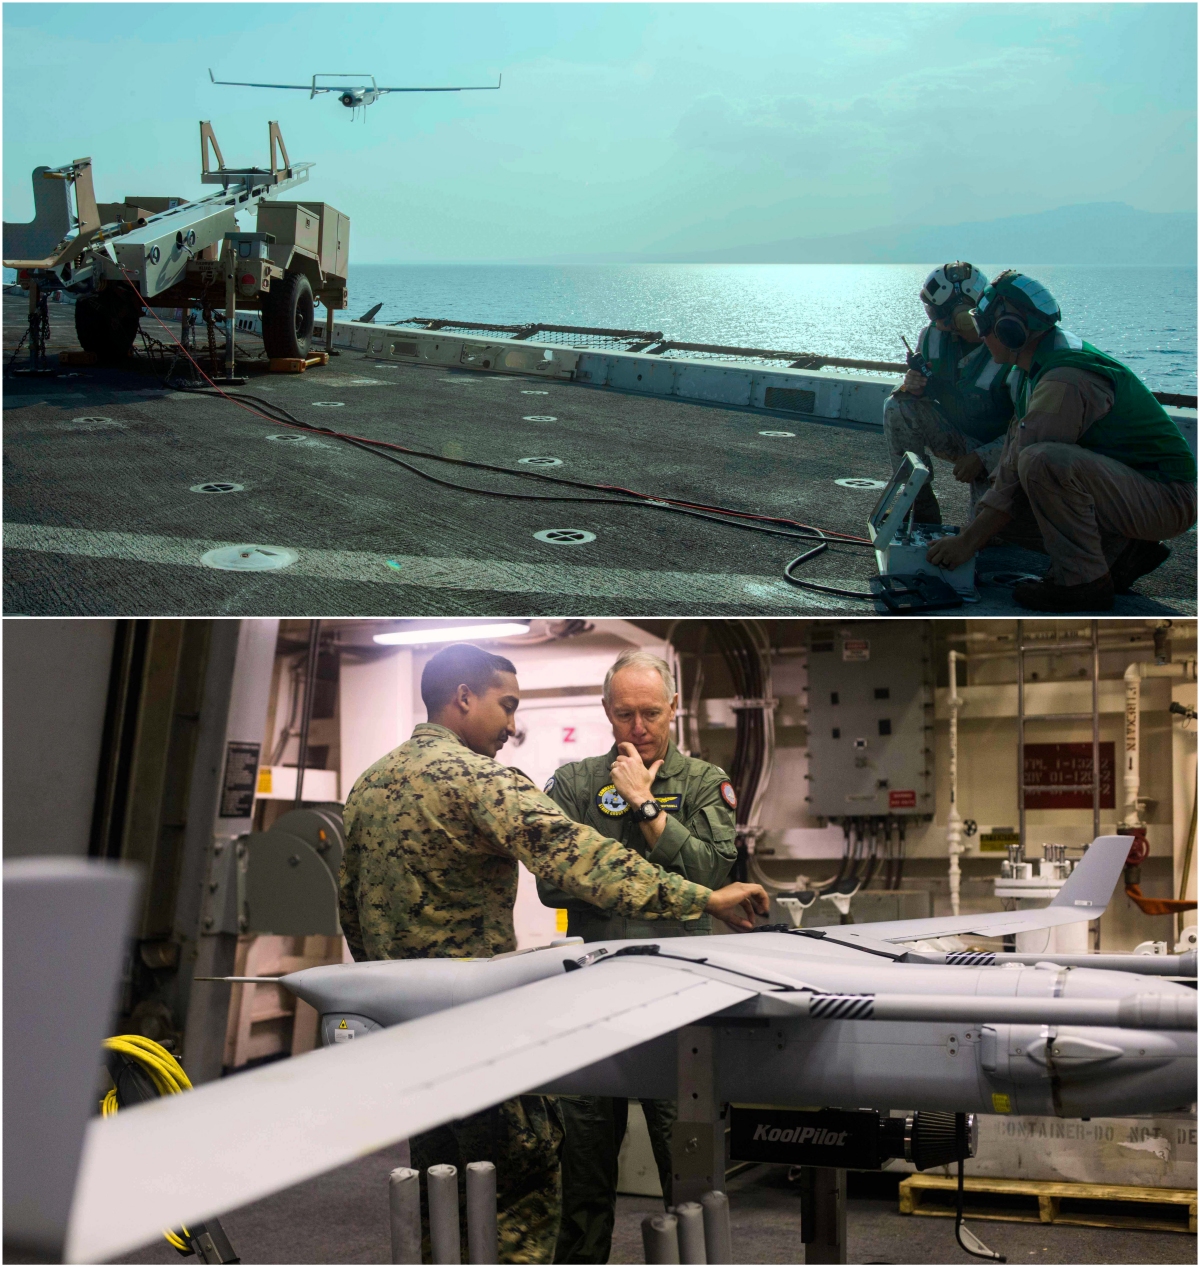 TOP: U.S. 5TH FLEET AREA OF OPERATIONS - Sailors assigned to Marine Medium Tiltrotor Squadron 161 (Reinforced) launch the RQ-21A Blackjack unmanned aerial aircraft aboard the amphibious transport dock ship USS San Diego (LPD 22) during Alligator Dagger 2017. (U.S. Navy photo by Mass Communication Specialist 3rd Class Justin A. Schoenberger/Released)

BOTTOM: ATLANTIC OCEAN (Nov. 15, 2017) - Marine Corps Capt. Daniel Dial, left, an unmanned aircraft system officer assigned to Marine Medium Tiltrotor Squadron (VMM) 162 (REIN), 26th Marine Expeditionary Unit (MEU), speaks with Navy Rear Adm. Kenneth Whitesell, commander of Carrier Strike Group (CSG) 4, about the RQ-21 Blackjack aboard the amphibious transport dock ship USS New York (LPD 21). (U.S. Marine Corps photo by Cpl. Jered T. Stone/Released)